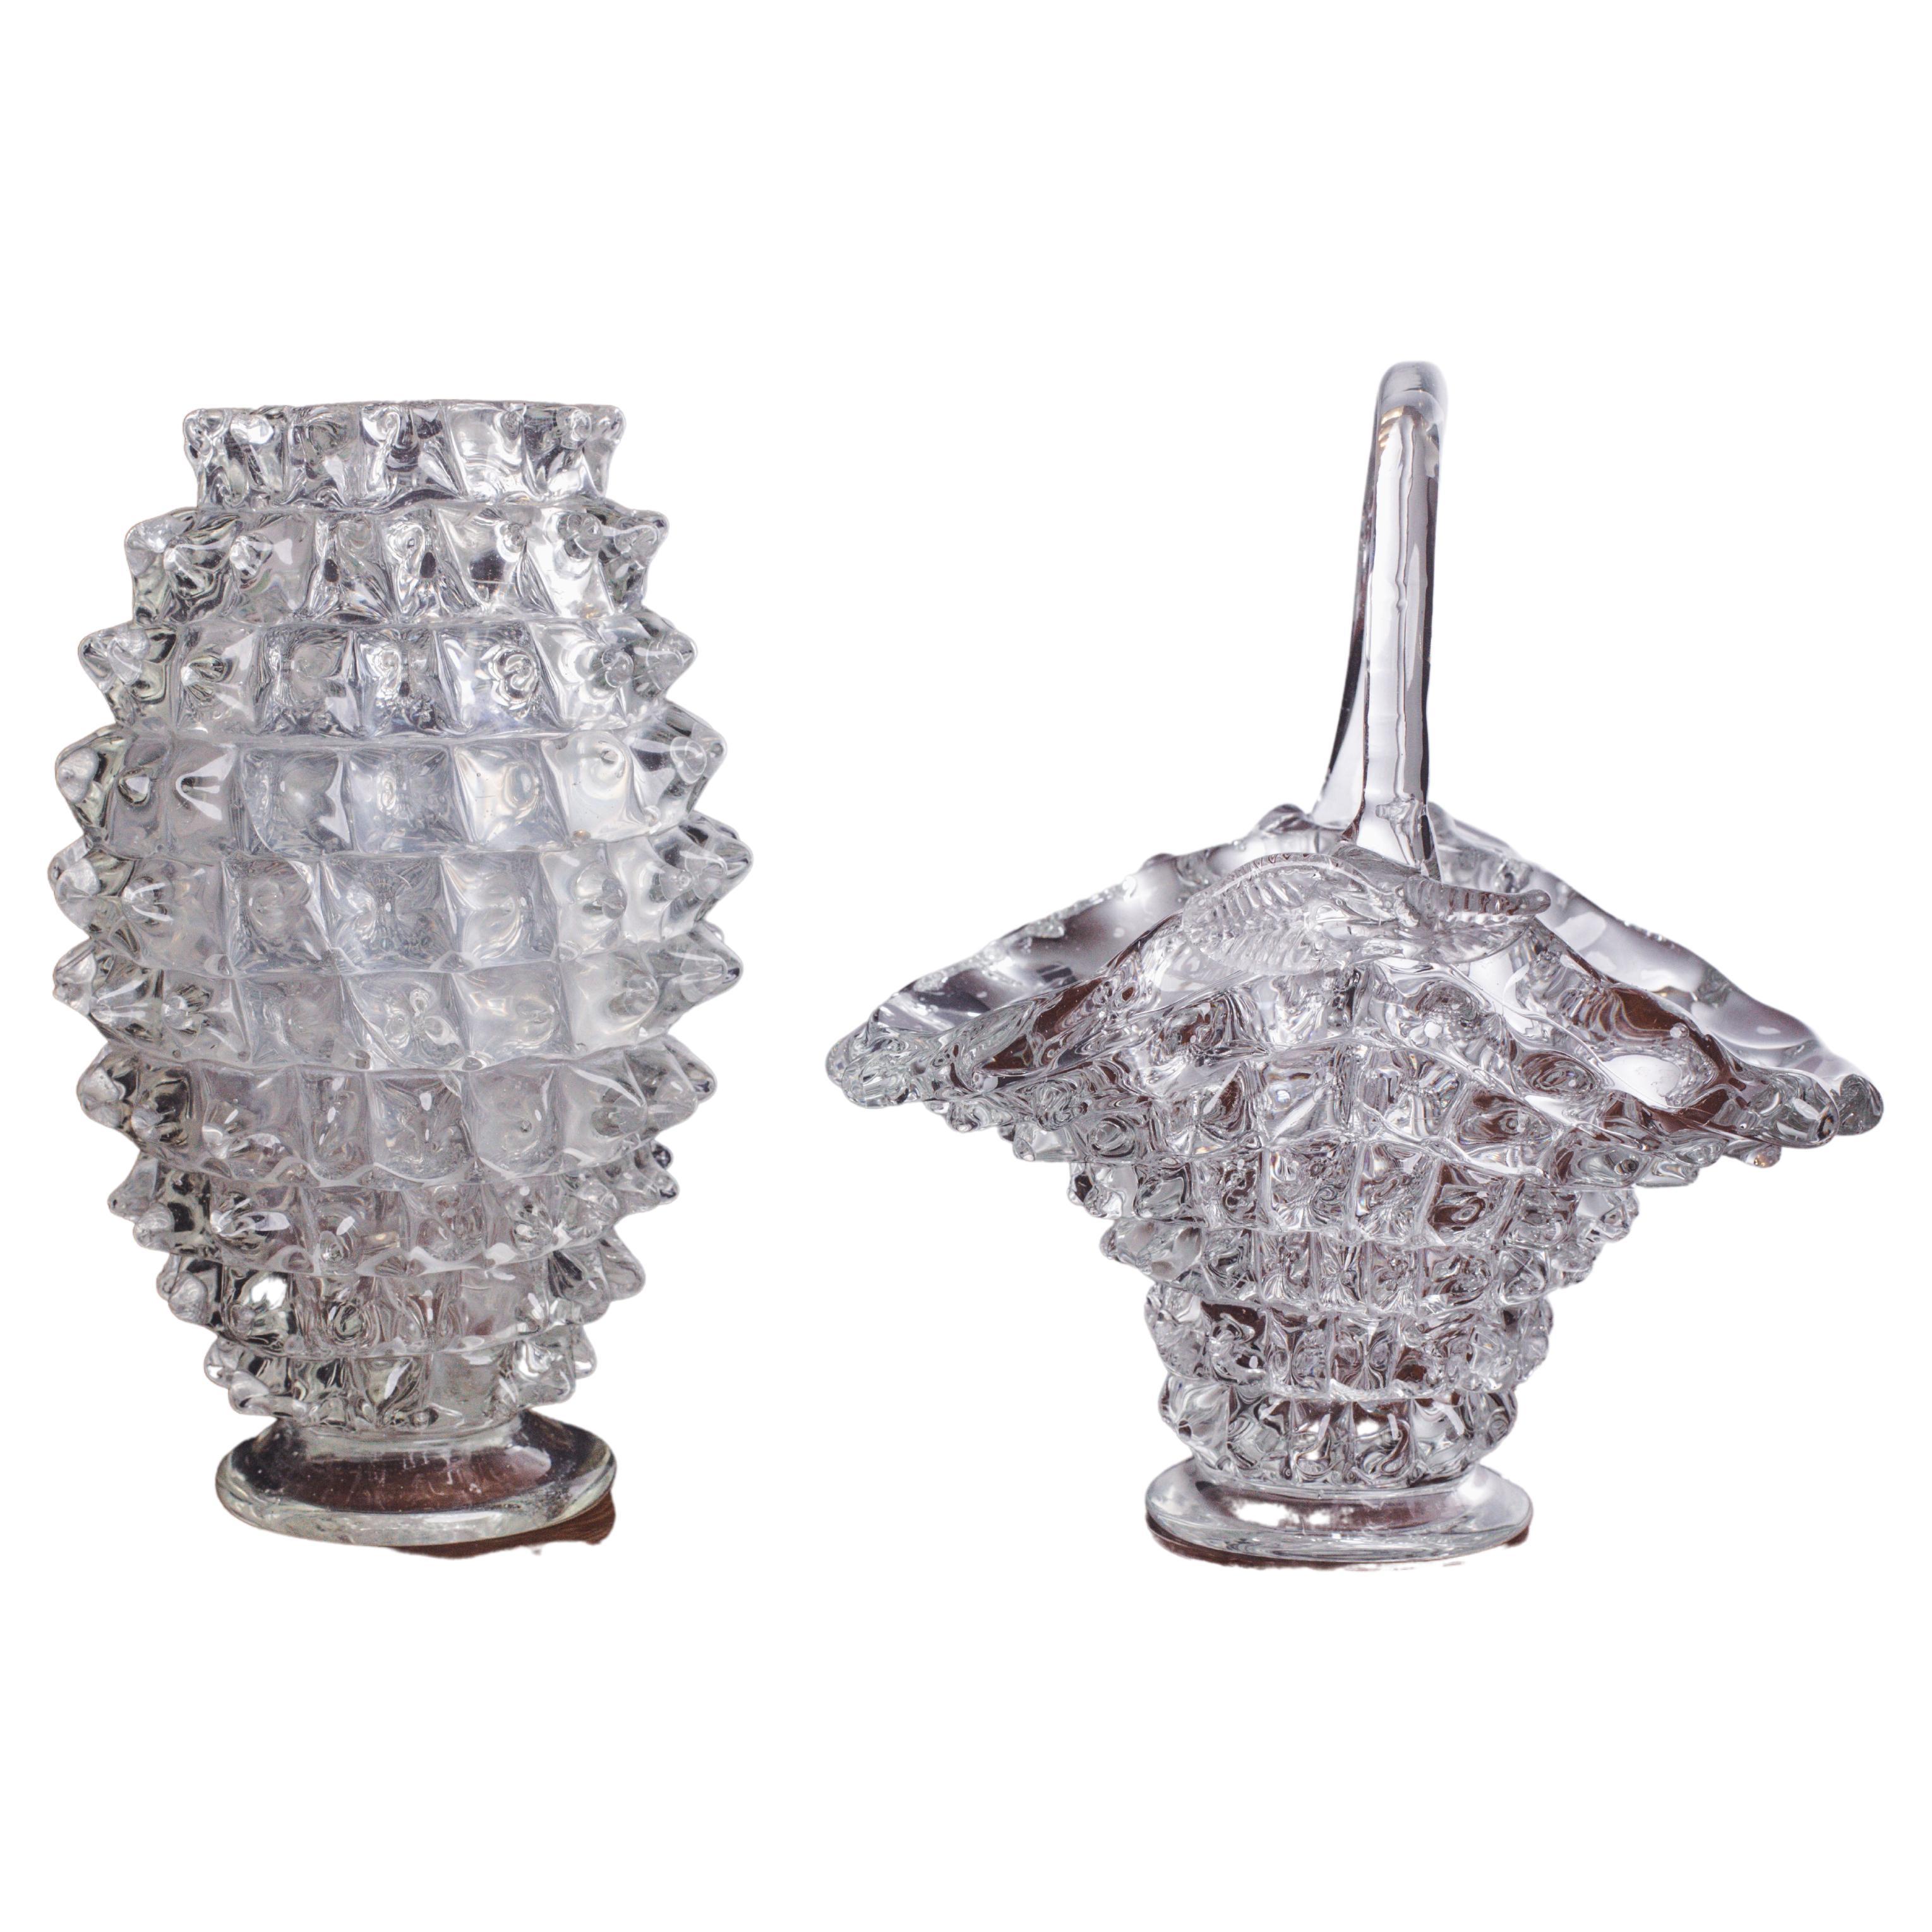 Vase:

Amazing midcentury mouth-blown rostrato crystal Murano glass vase. This wonderful object was produced during the 1940s in Italy by Ercole Barovier for Barovier & Toso.

This masterpiece is a fantastic tribute to the incredible workmanship